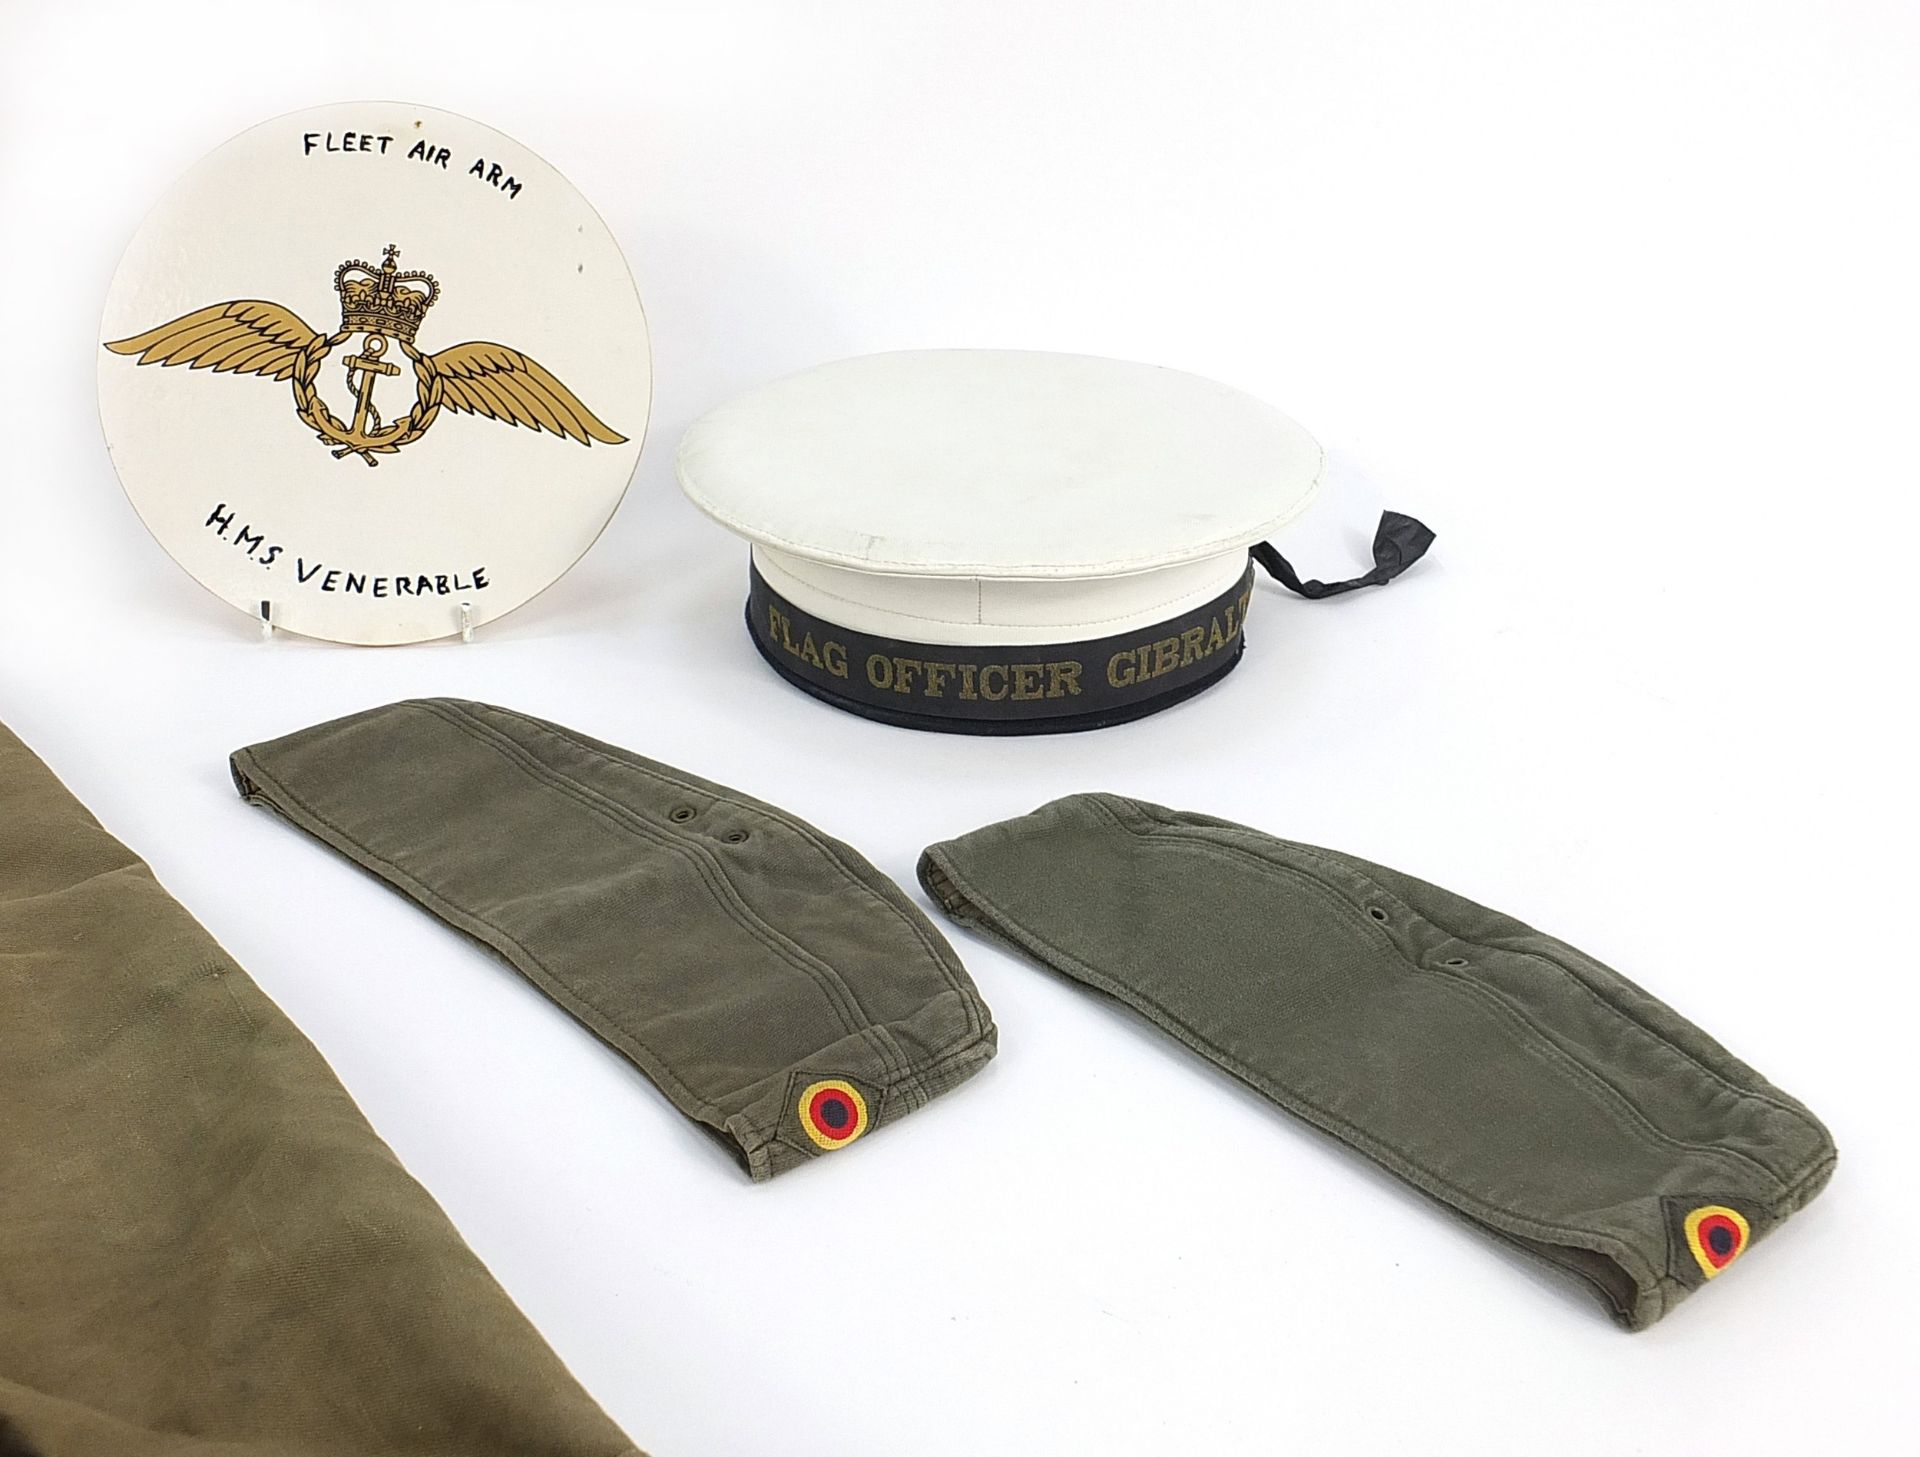 Flag Officer Gibraltar naval hat, Fleet Air Arm wooden plaque, two khaki military hats and two kit - Image 3 of 4